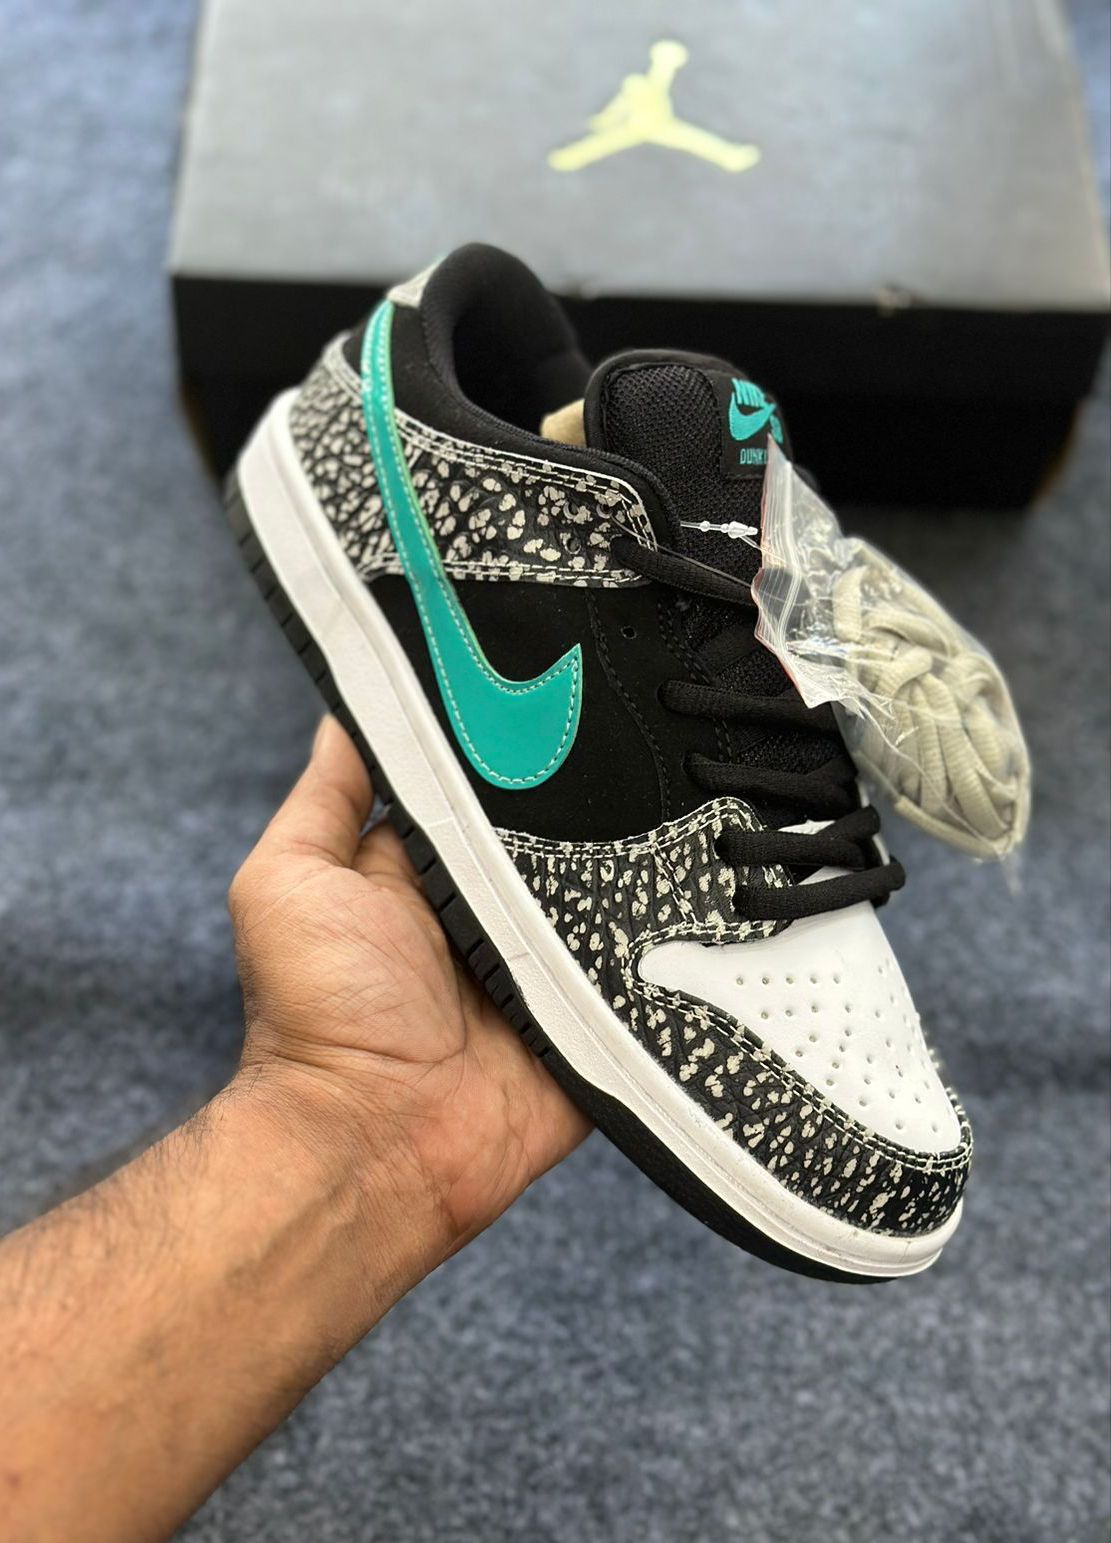 SB Dunk Atmos Elephant Sneakers In Stock